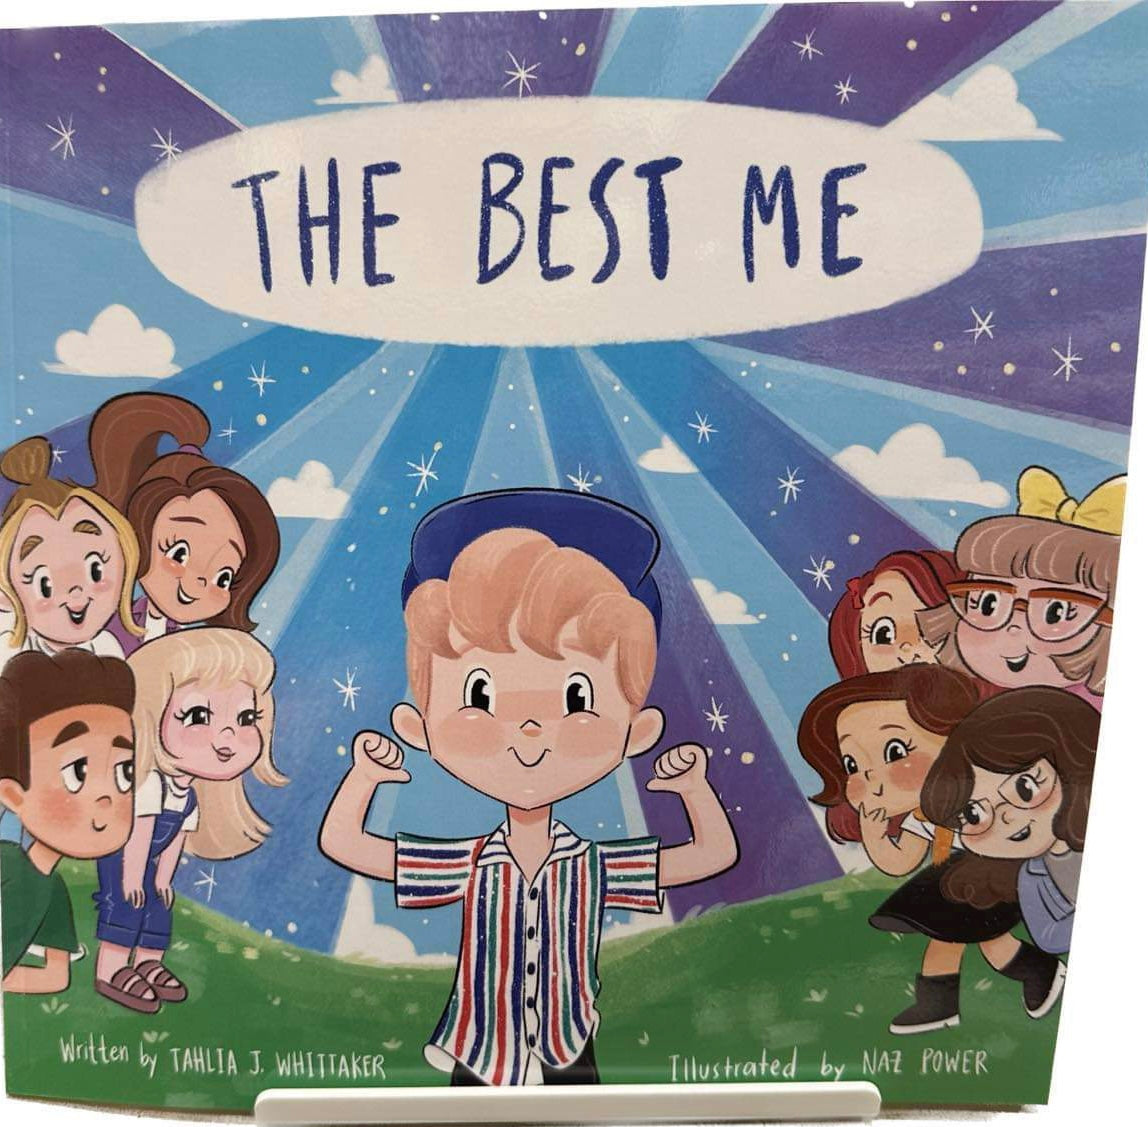 The Best Me by Tahlia J. Whittaker